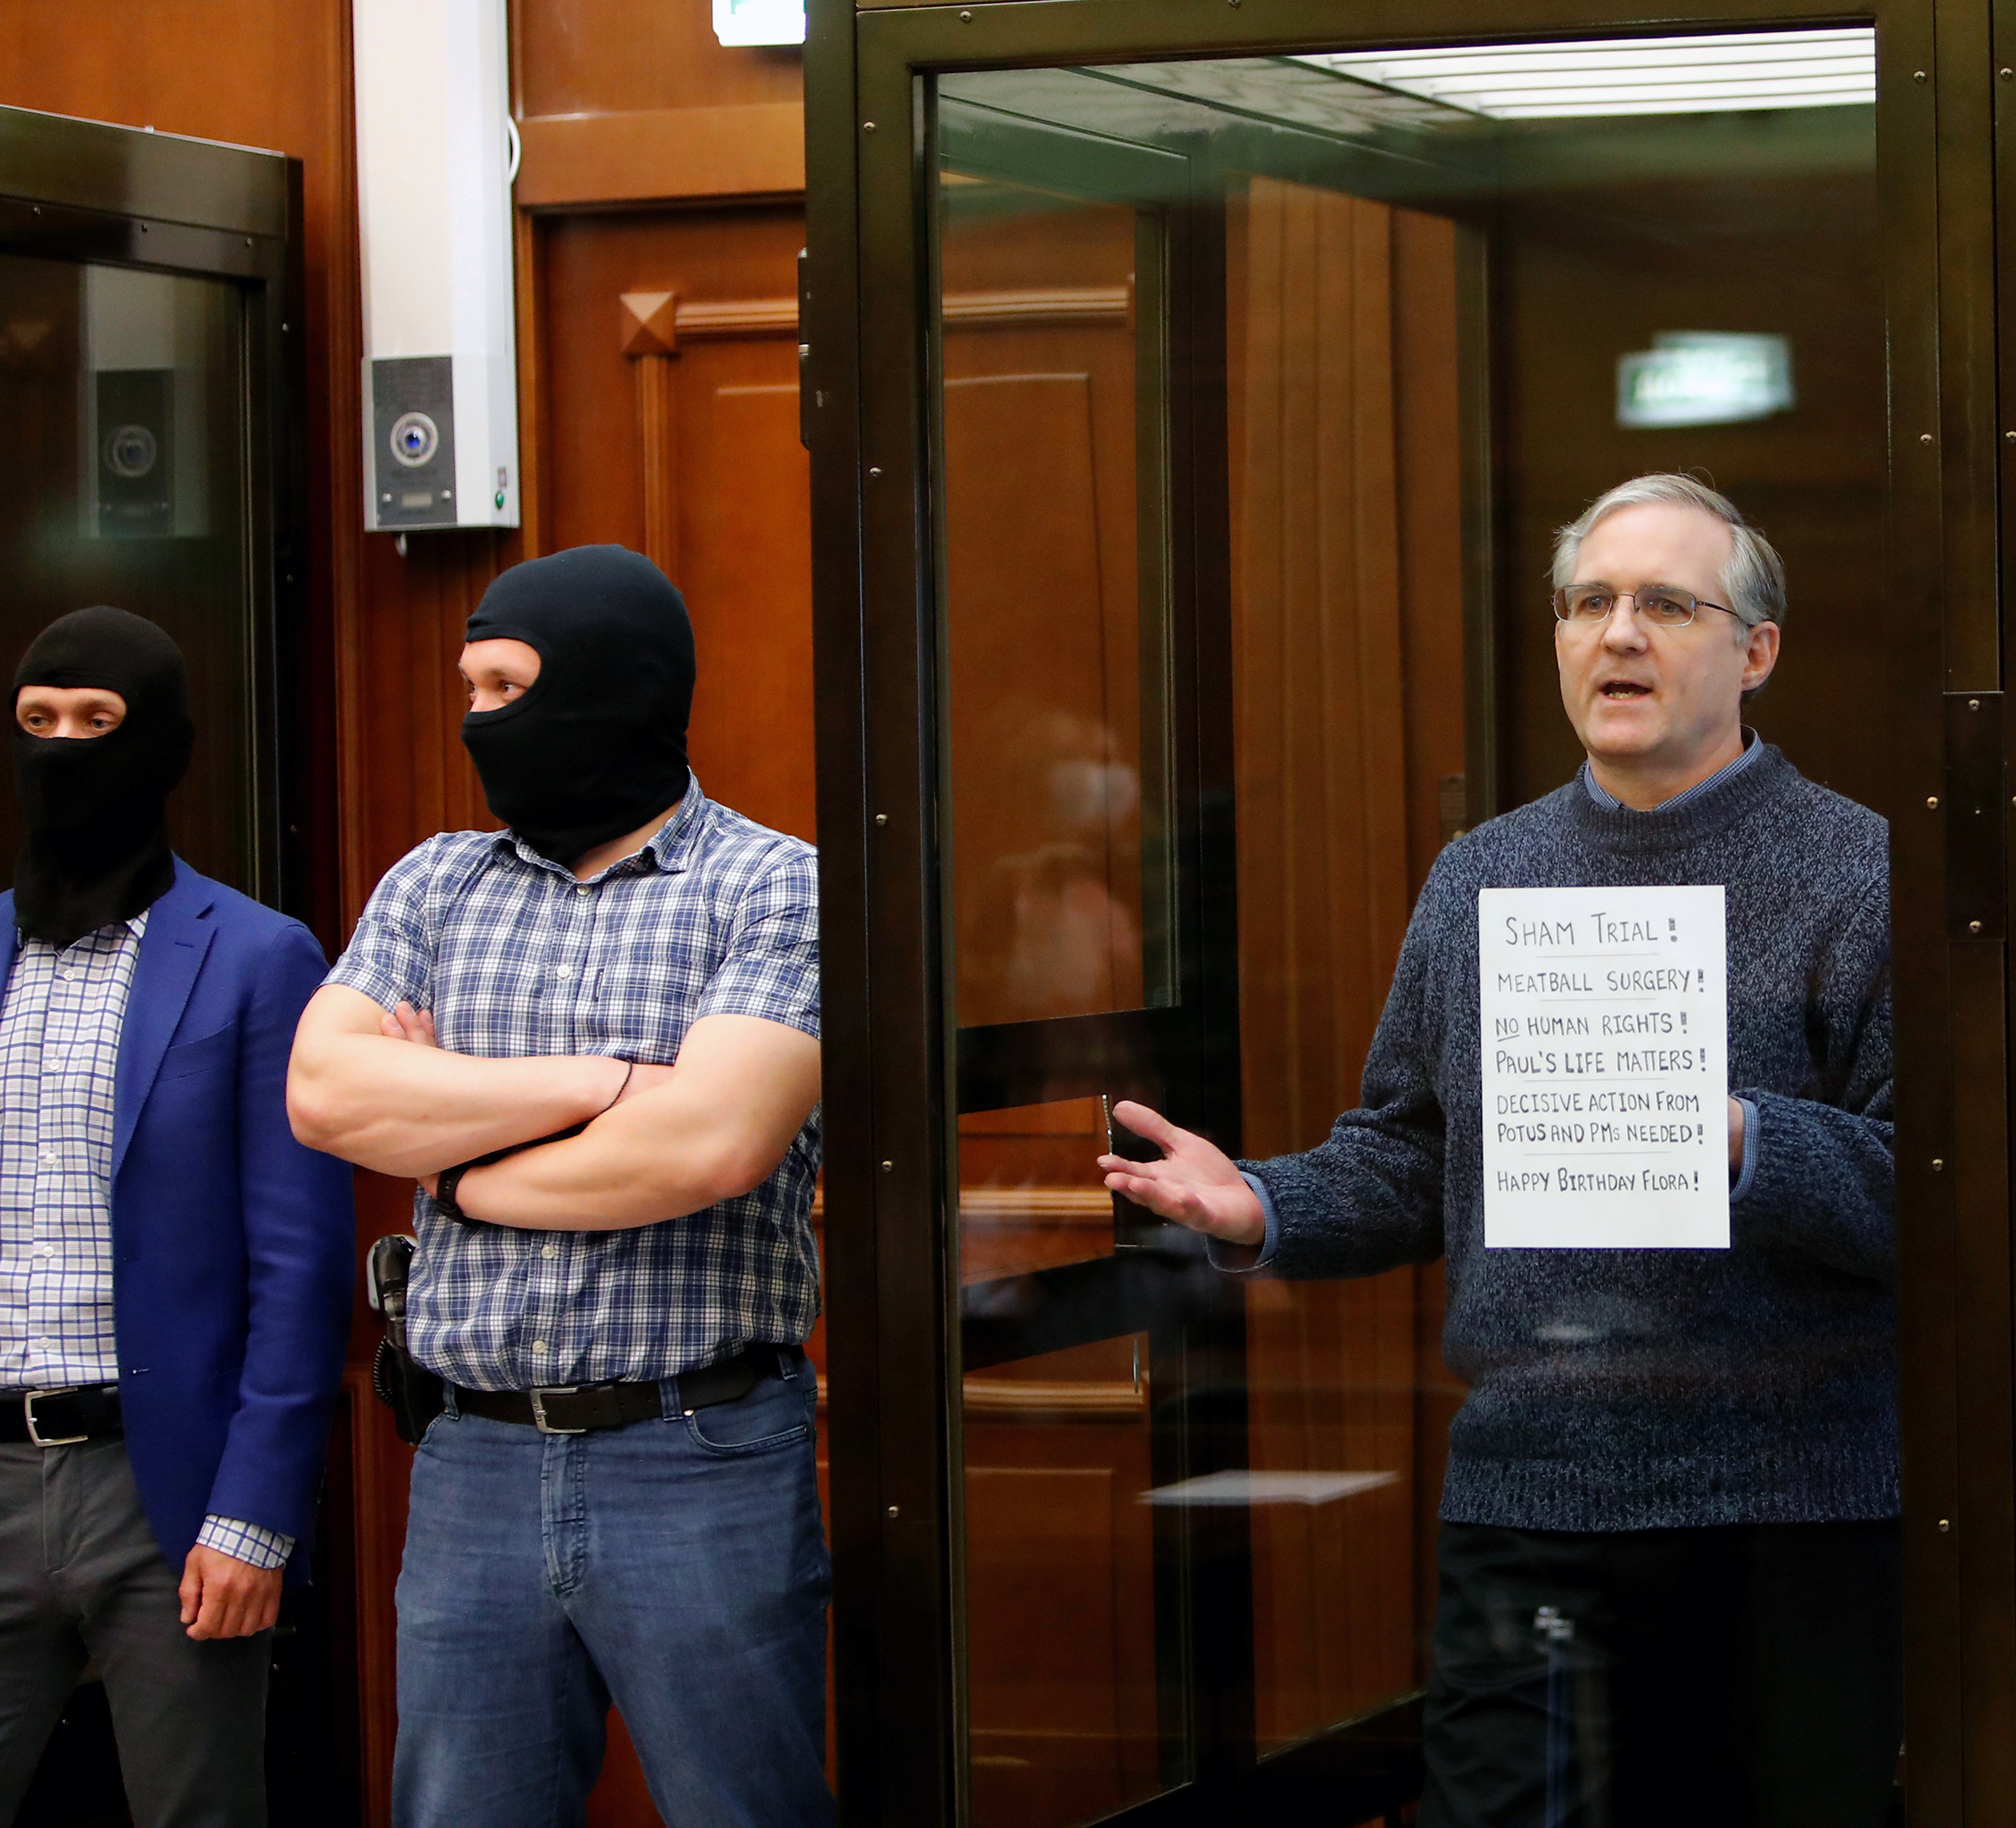 PHOTO: In this June 15, 2020, file photo, former U.S. Marine Paul Whelan, who was detained and accused of espionage, holds a sign as he stands inside a defendants' cage during his verdict hearing in Moscow.